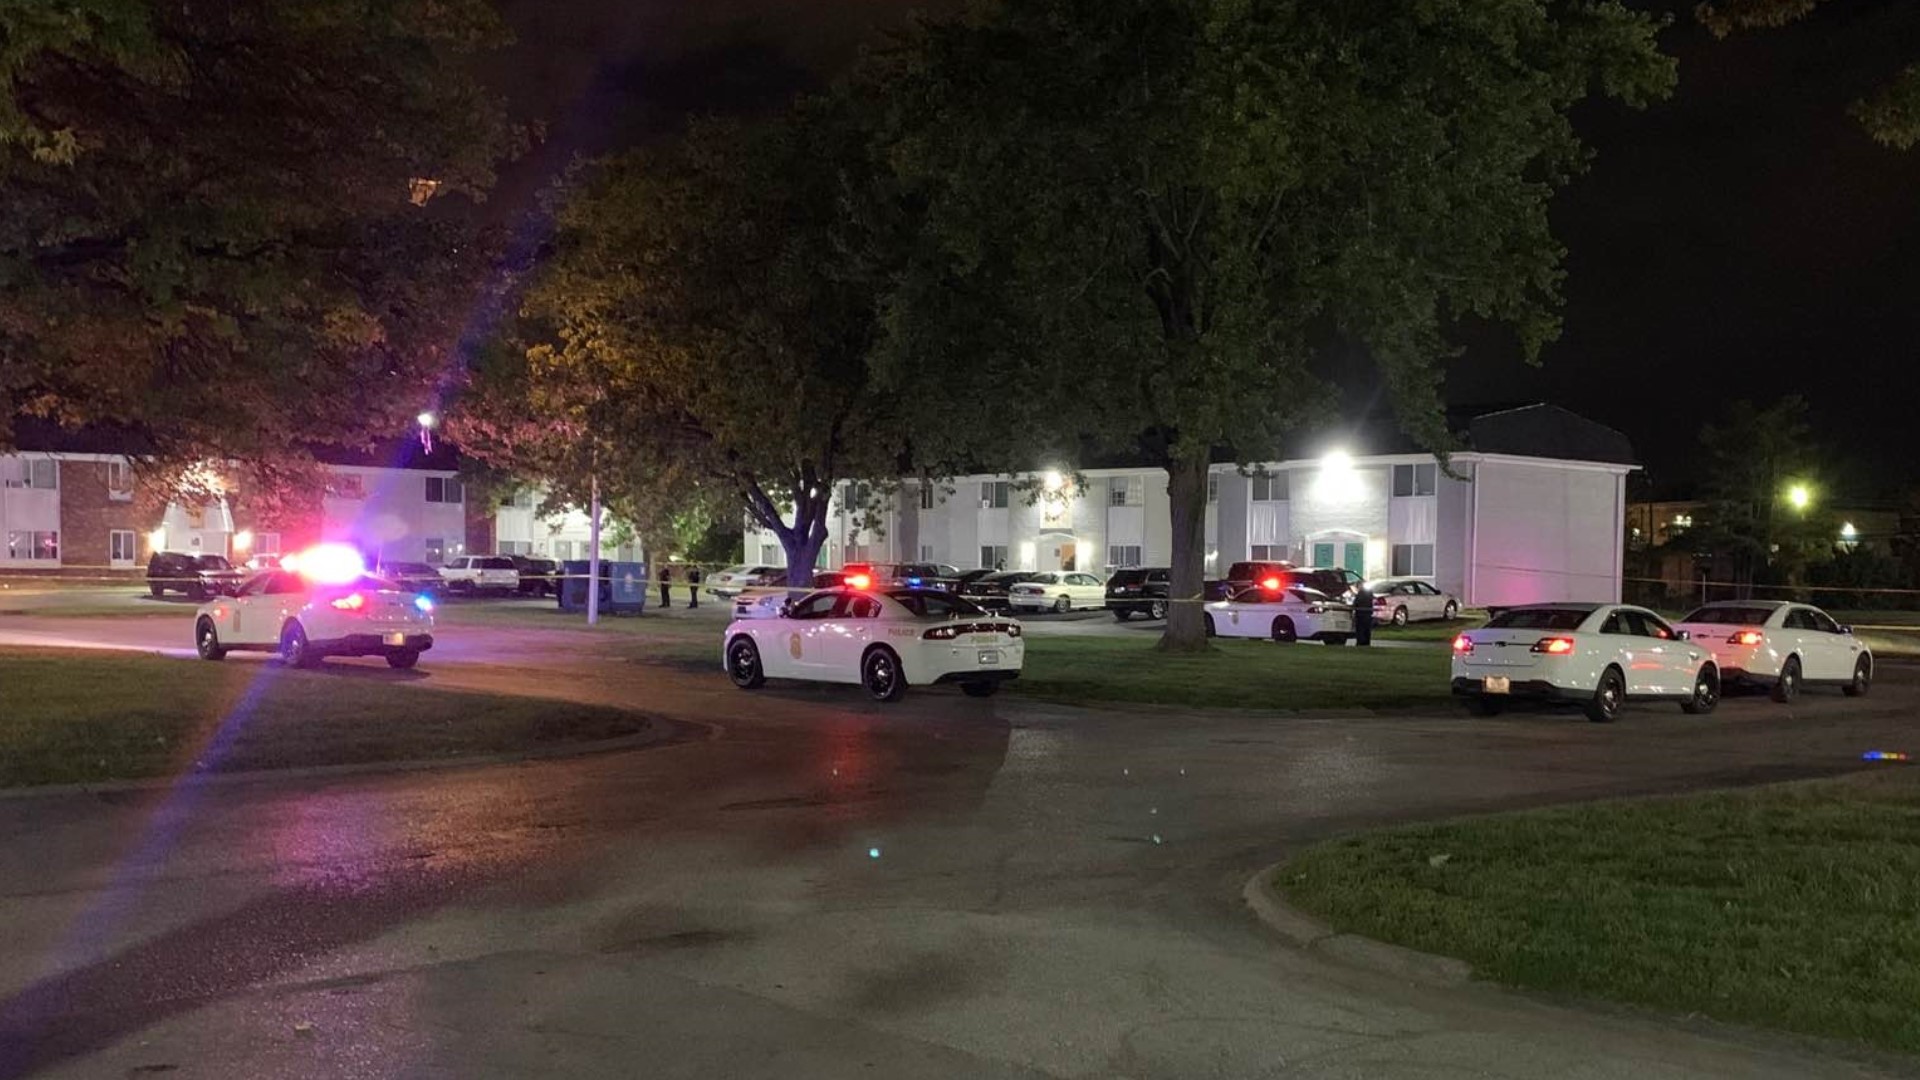 The first shooting occurred shortly before 8 p.m. Wednesday and the most recent around 3 a.m. Thursday.